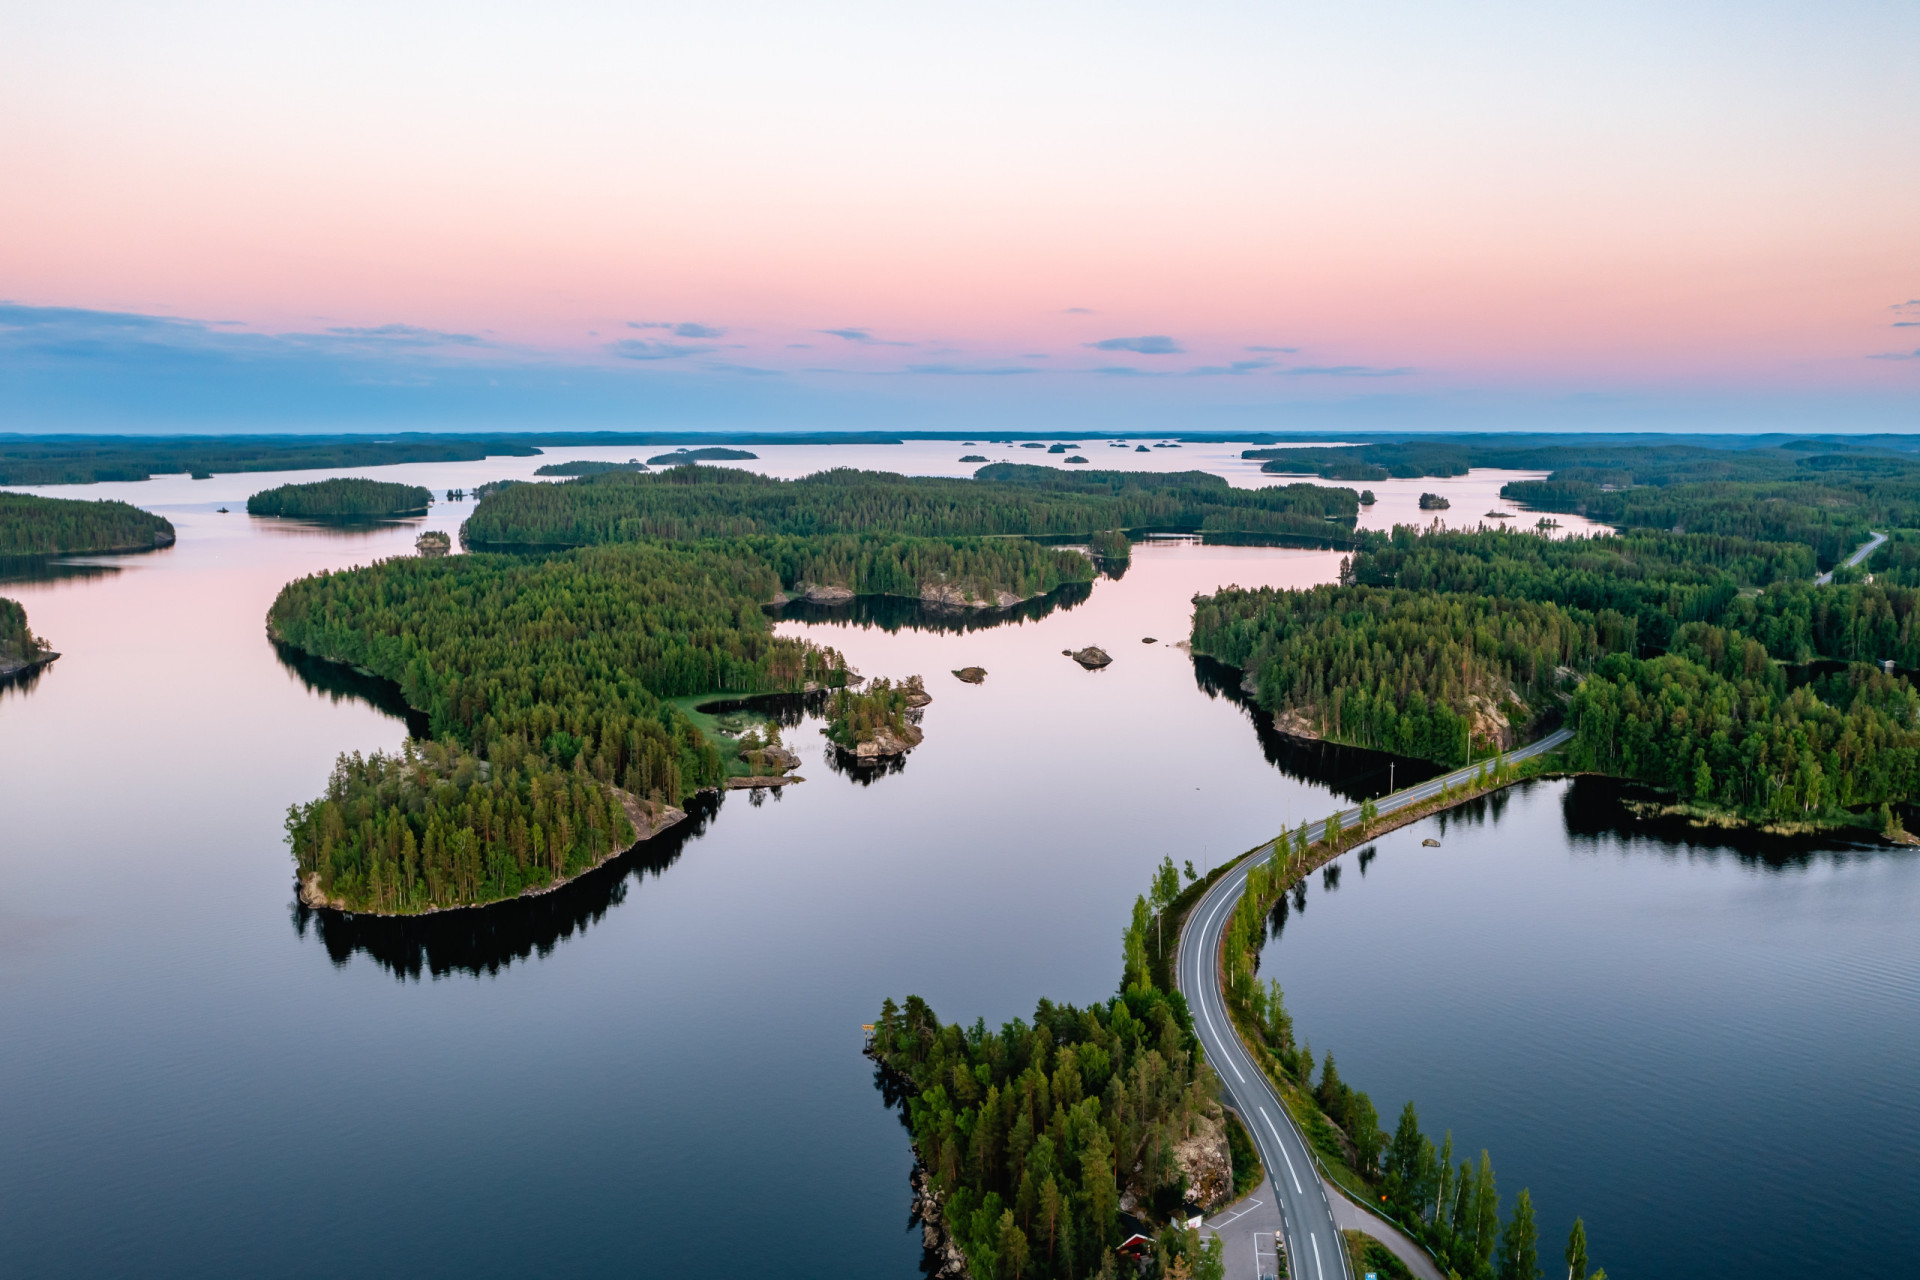 <p>The region of Saimaa has recently gained an extra draw by becoming a European Region of Gastronomy. Along with its culinary mastery, this corner of Europe is also full of hiking trails and historic towns.</p><p><a href="https://www.msn.com/en-us/community/channel/vid-7xx8mnucu55yw63we9va2gwr7uihbxwc68fxqp25x6tg4ftibpra?cvid=94631541bc0f4f89bfd59158d696ad7e">Follow us and access great exclusive content every day</a></p>